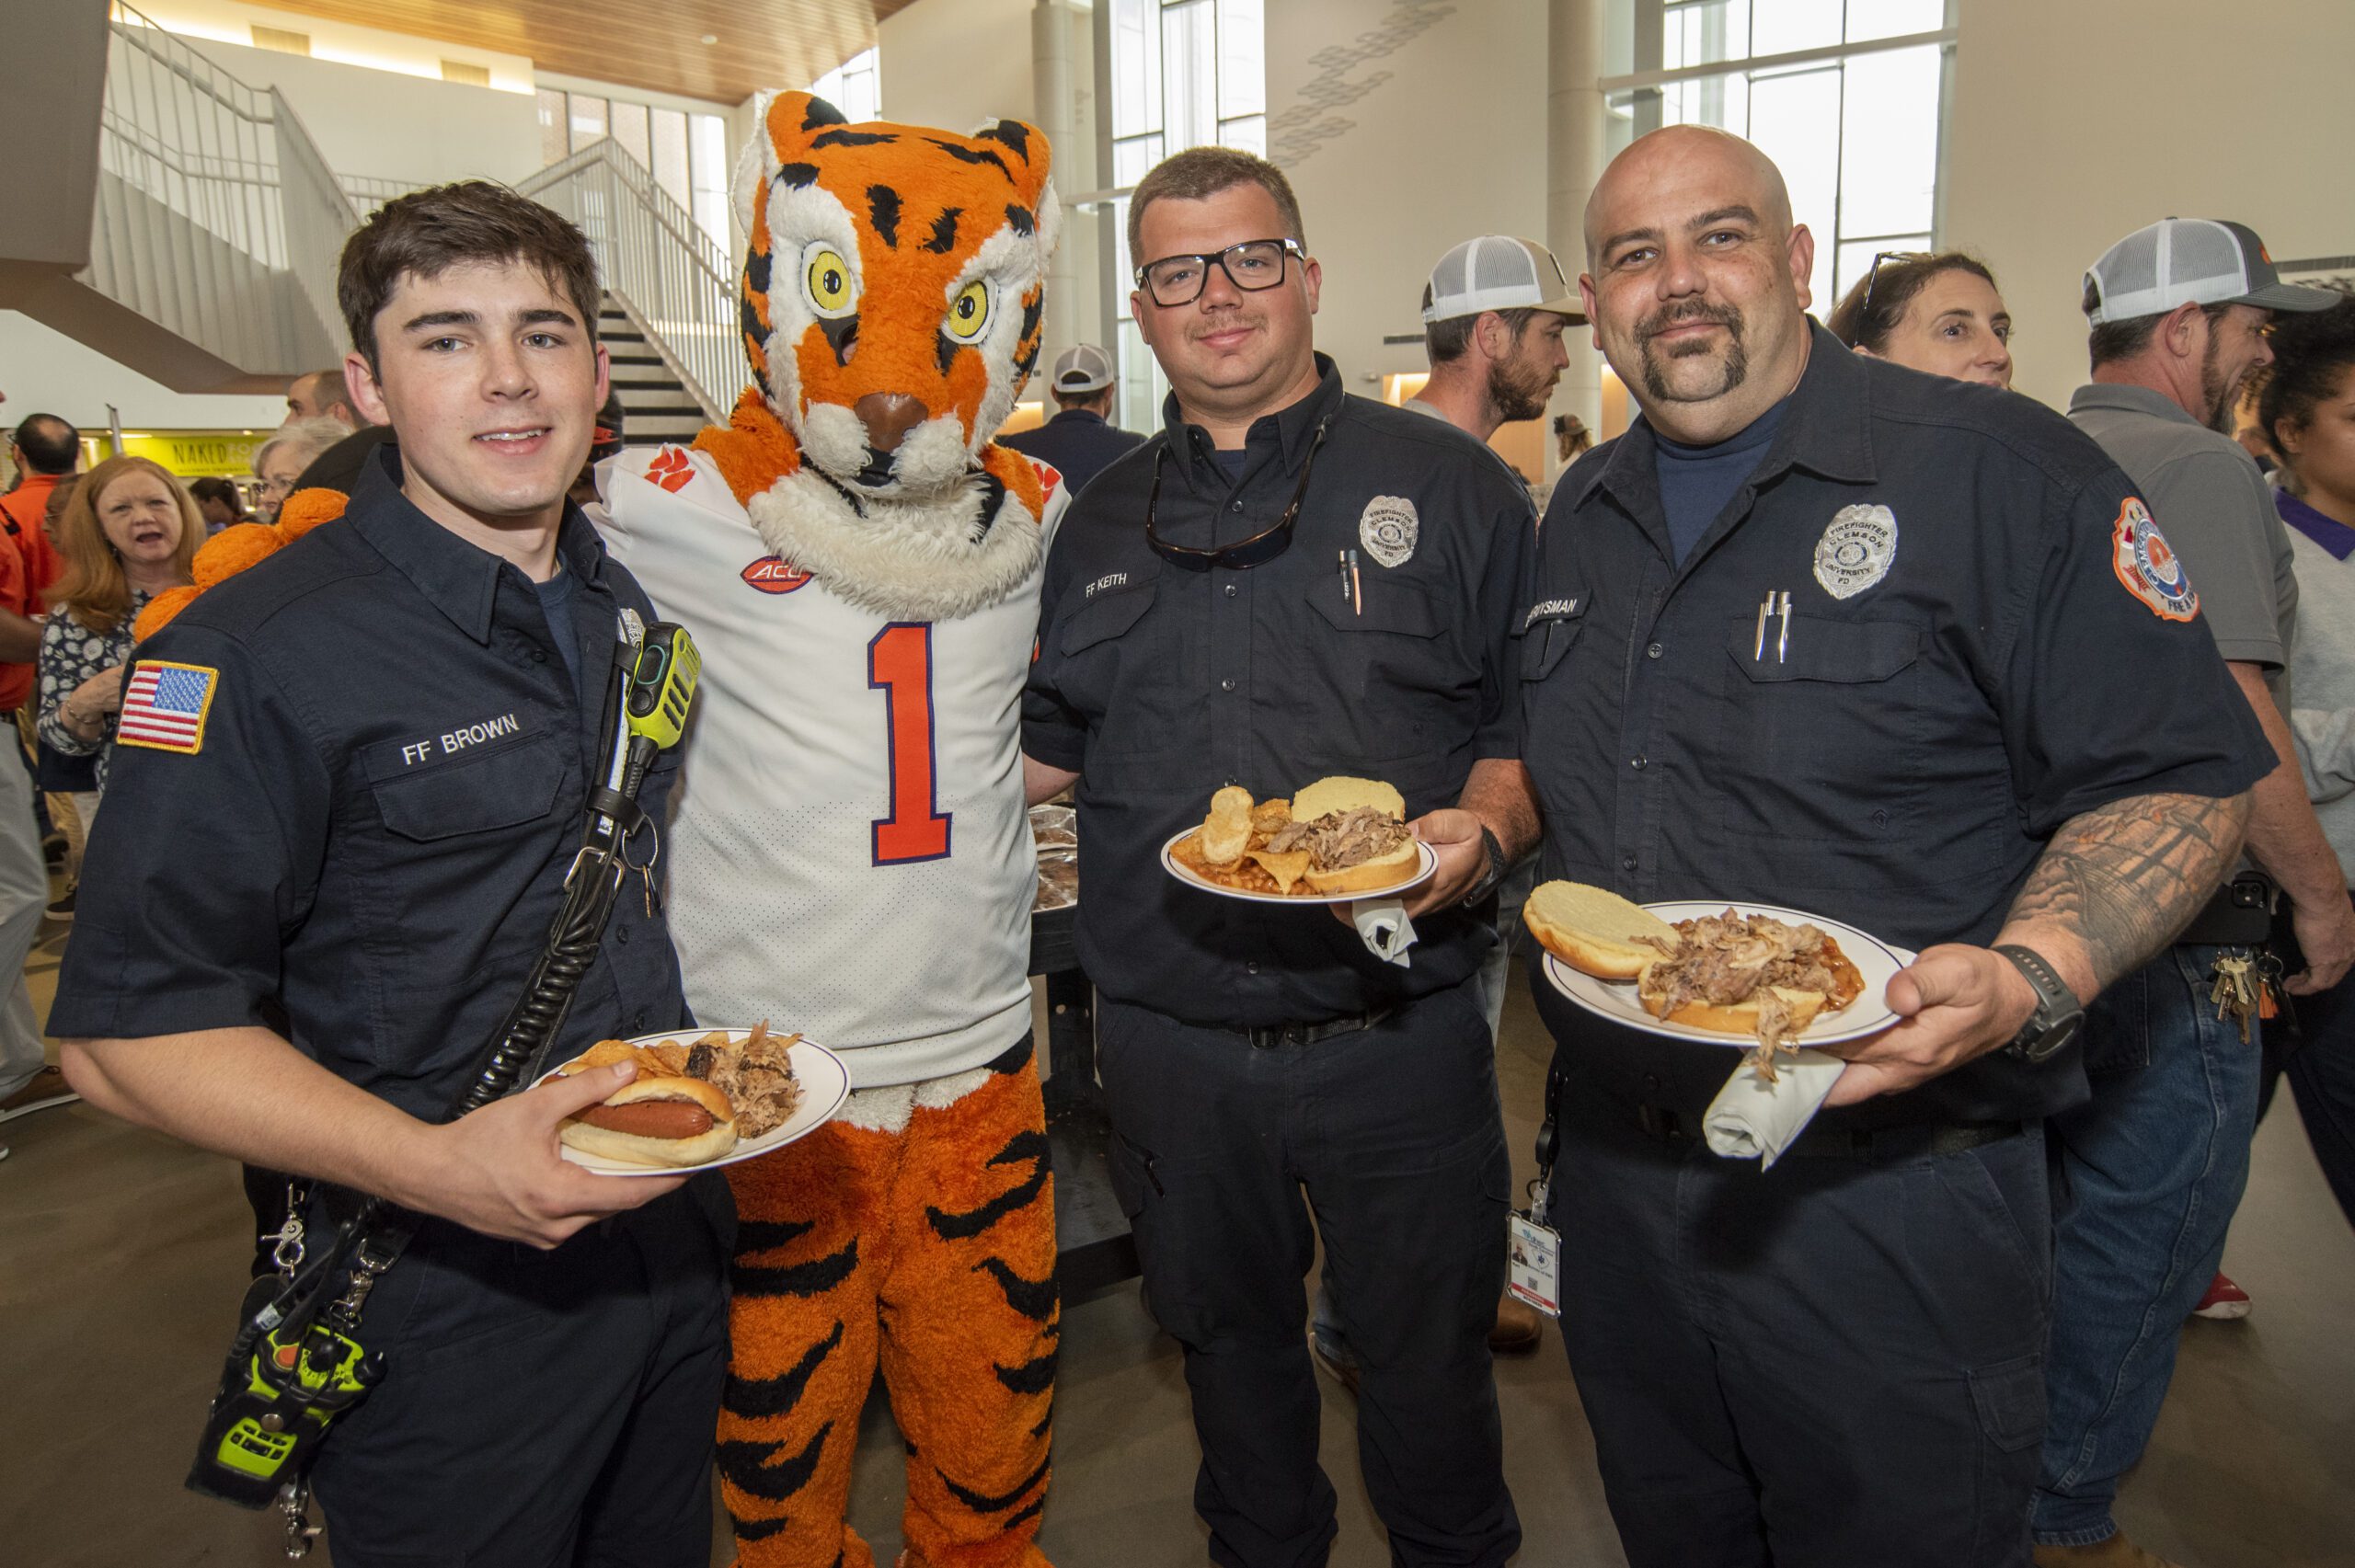 Three men wearing Clemson Police uniforms and holding plates of food pose for a photo with the Clemson Tiger.